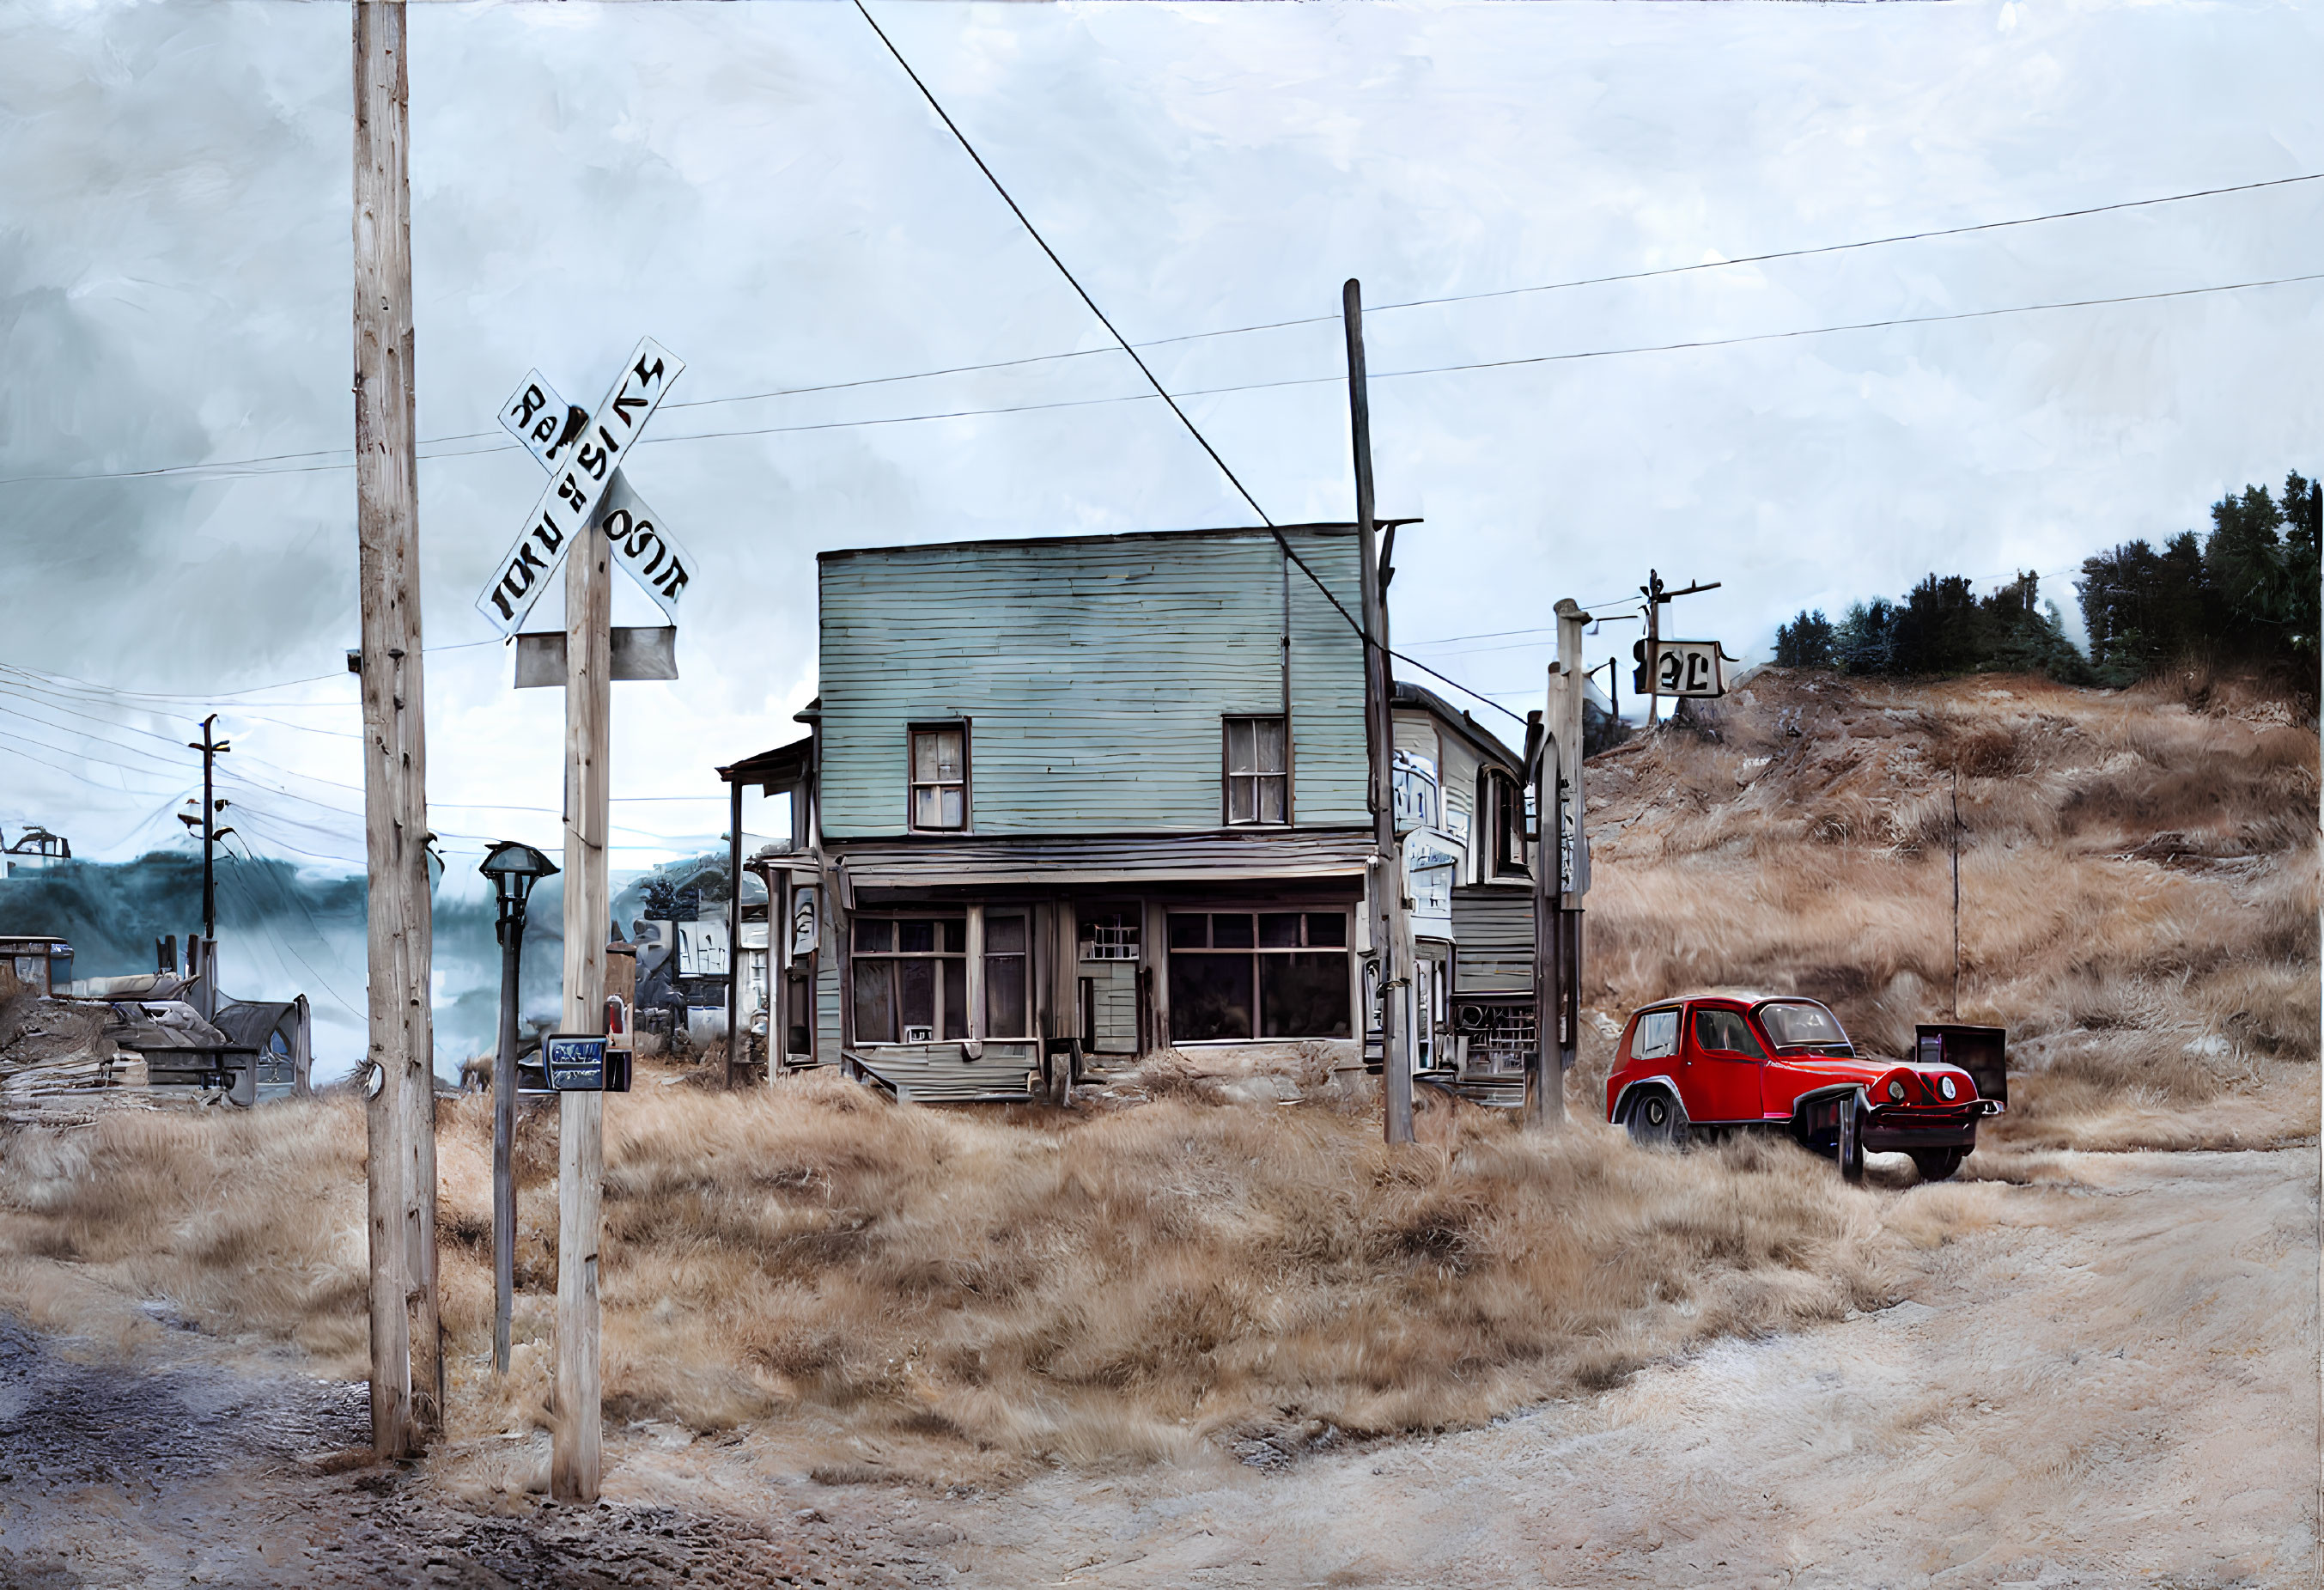 Desolate old western town with wooden building, classic car, and dusty landscape.